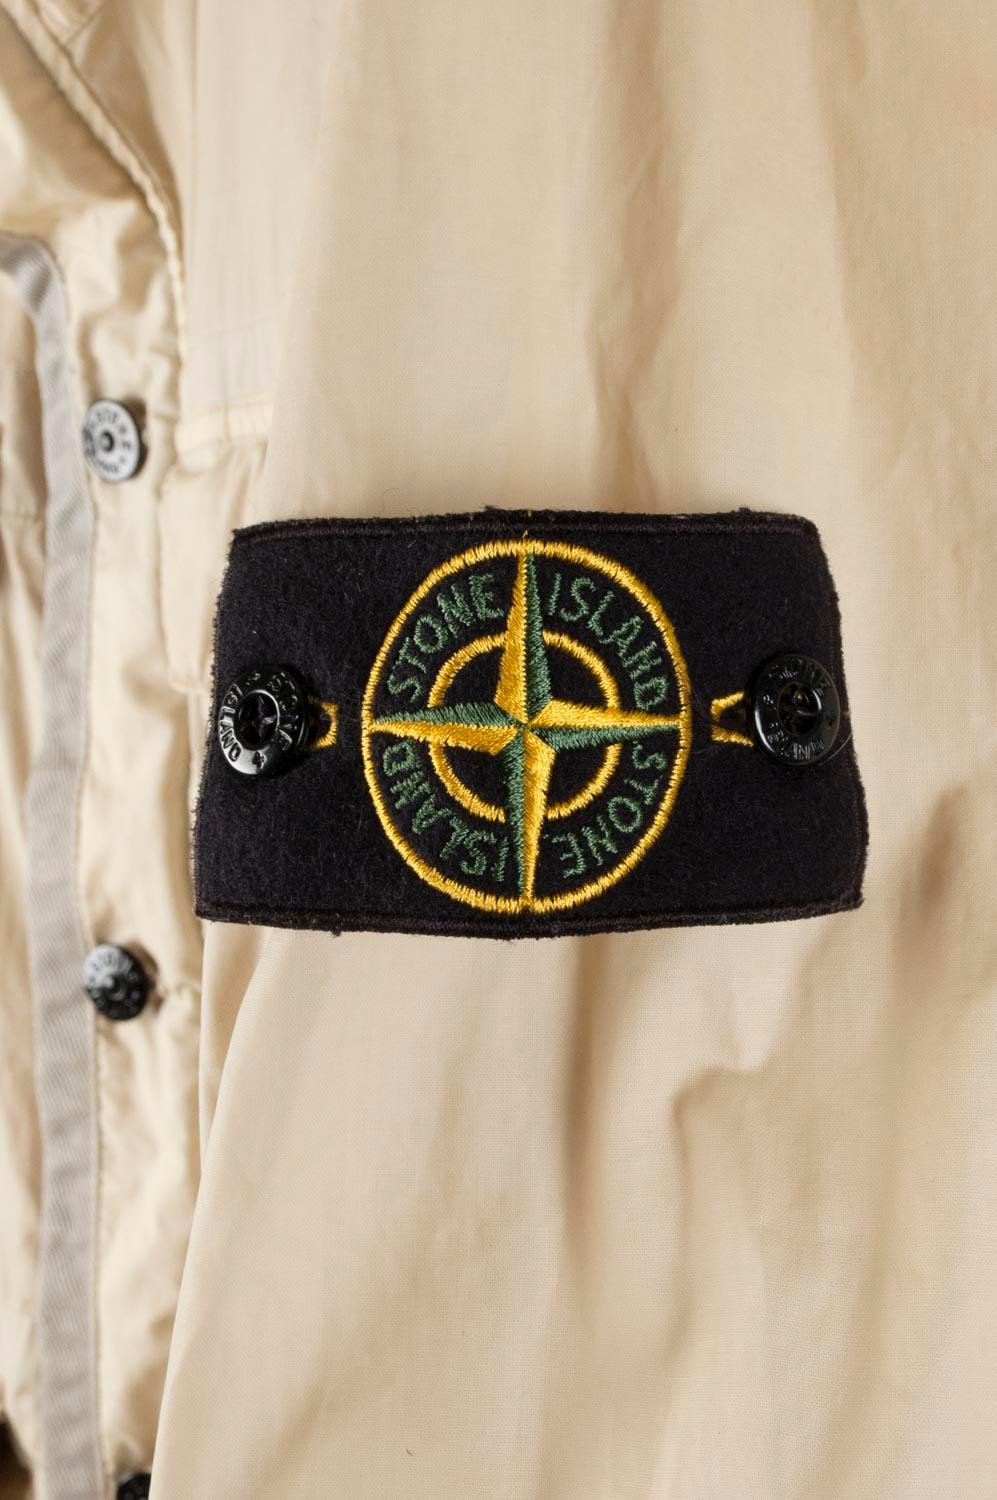 Stone Island Men Jacket Mussola Gommata Size L, S430 In Good Condition For Sale In Kaunas, LT